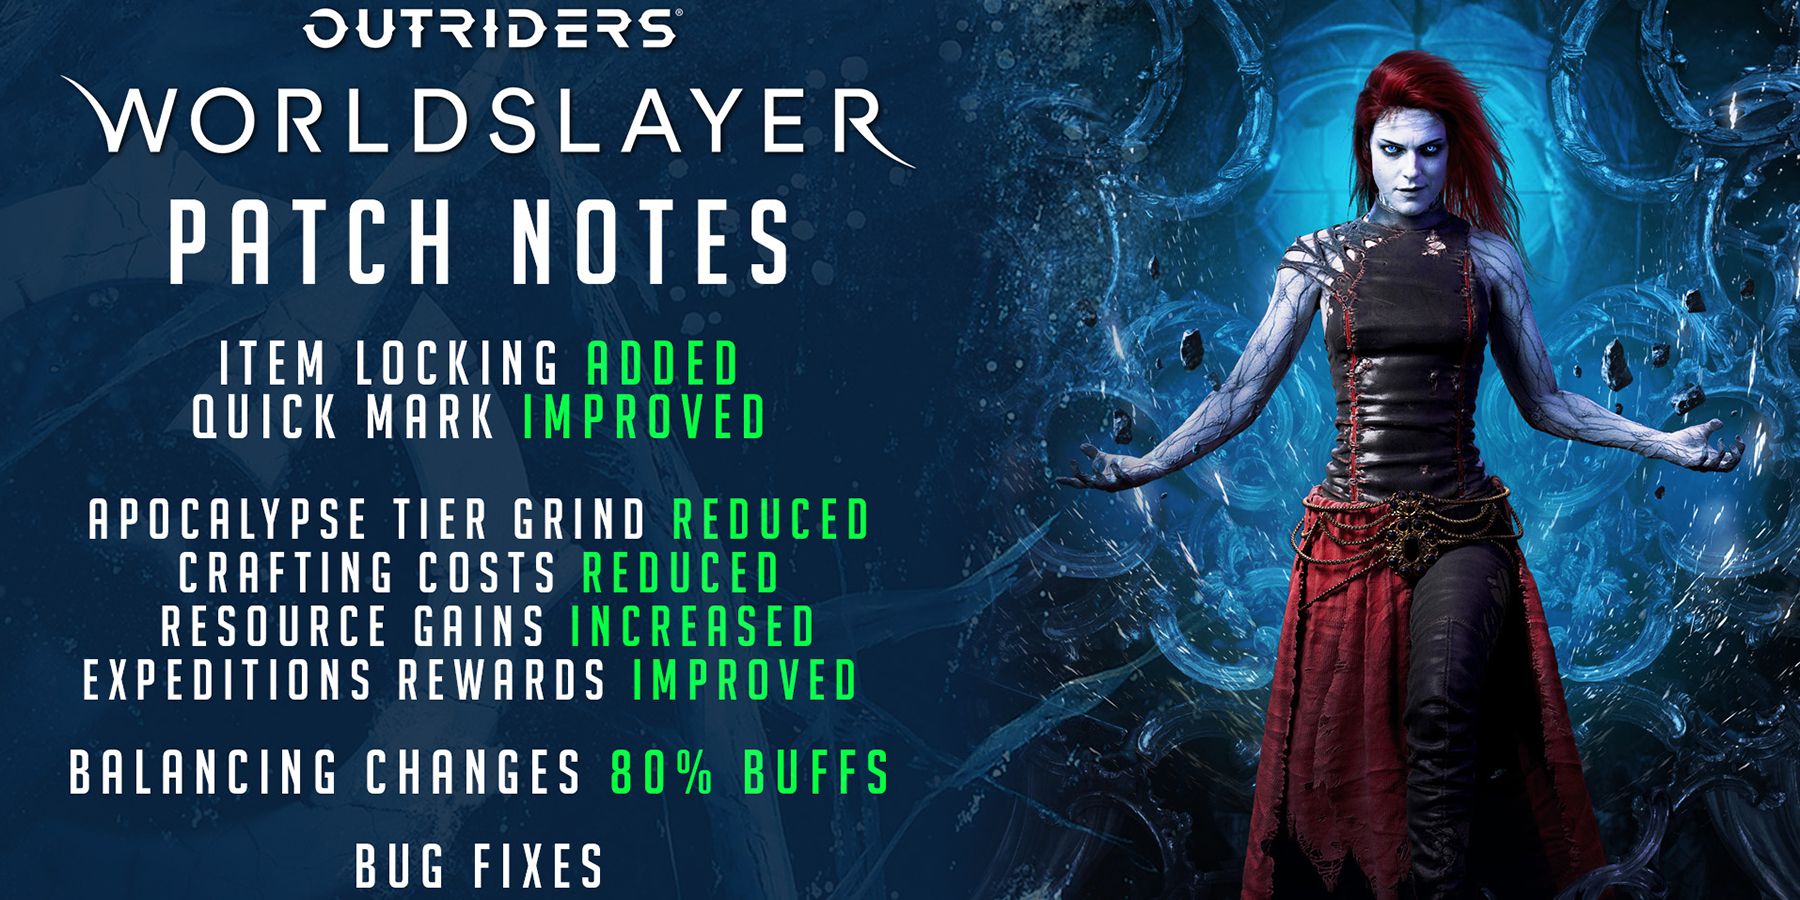 outriders-patch-notes